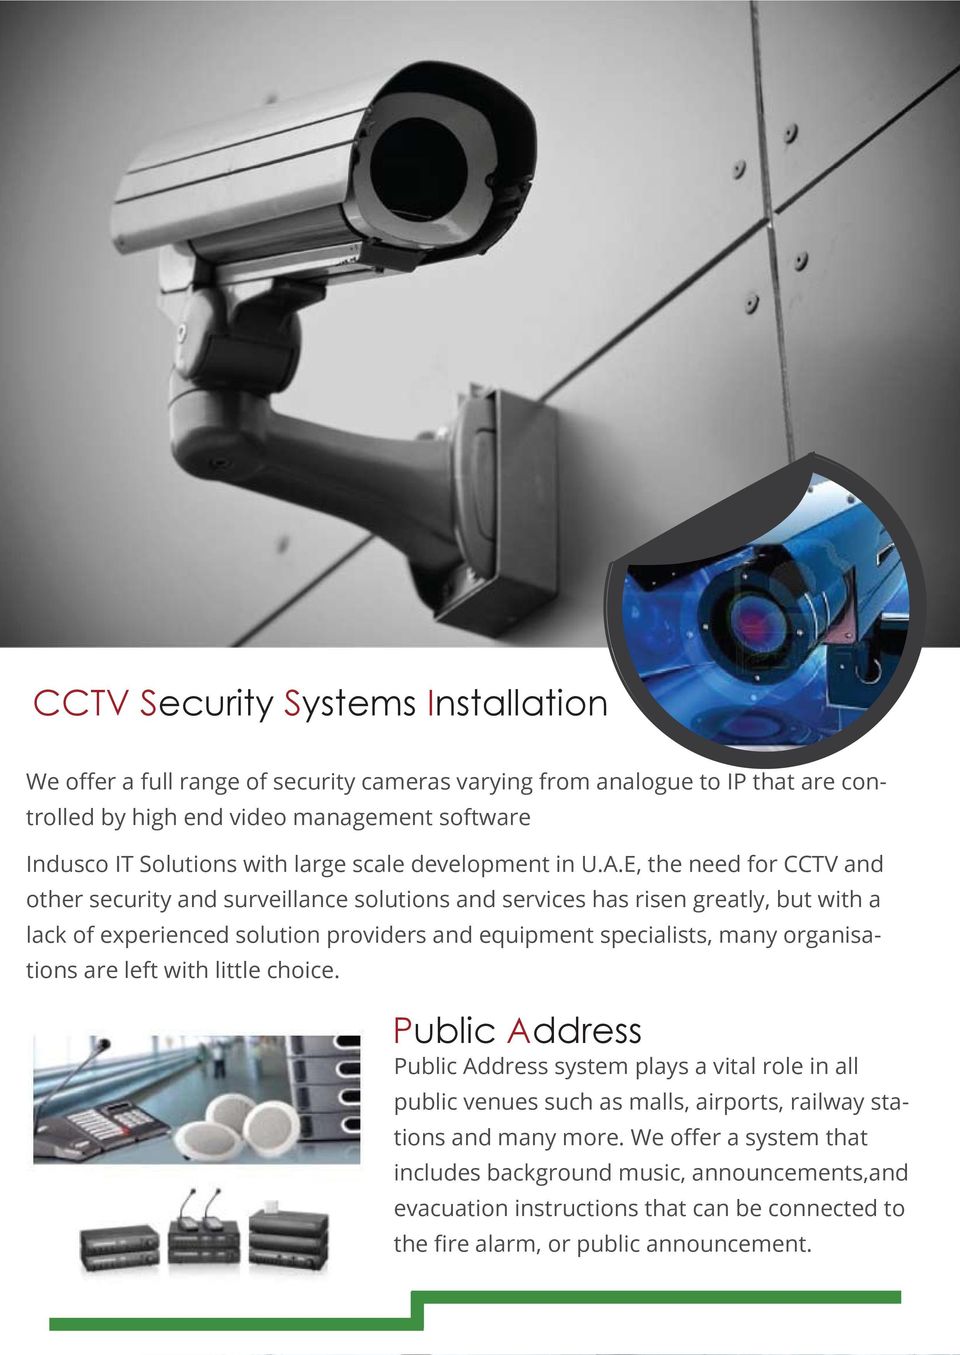 E, the need for CCTV and other security and surveillance solutions and services has risen greatly, but with a lack of experienced solution providers and equipment specialists, many